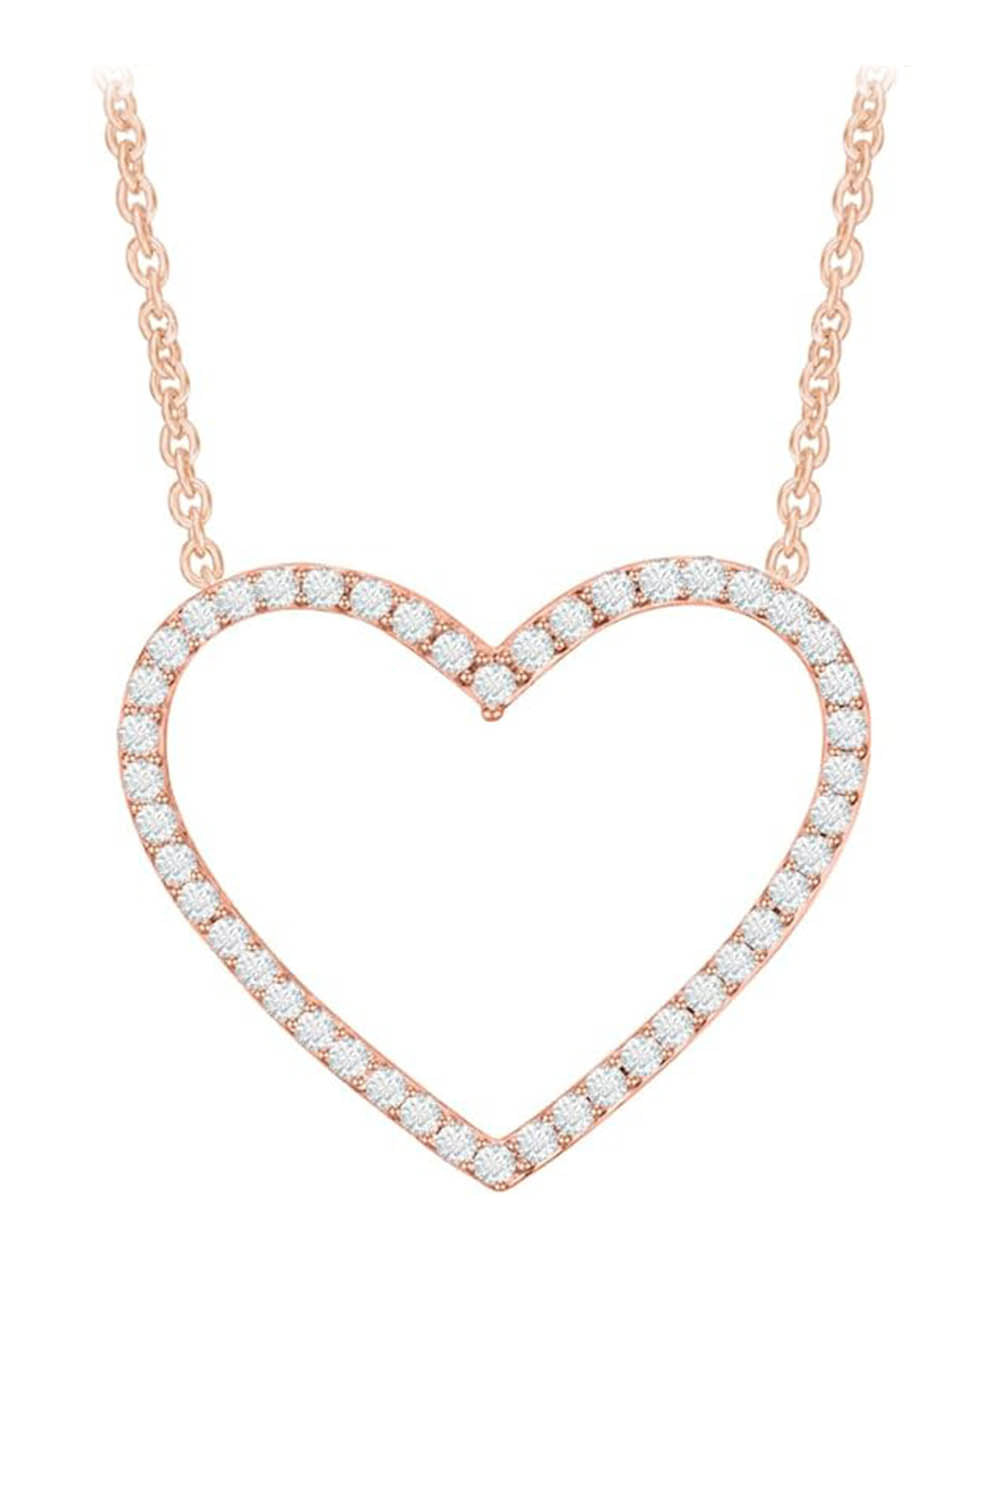 Exclusive Rose Gold Color Round Moissanite Heart Pendant Necklace